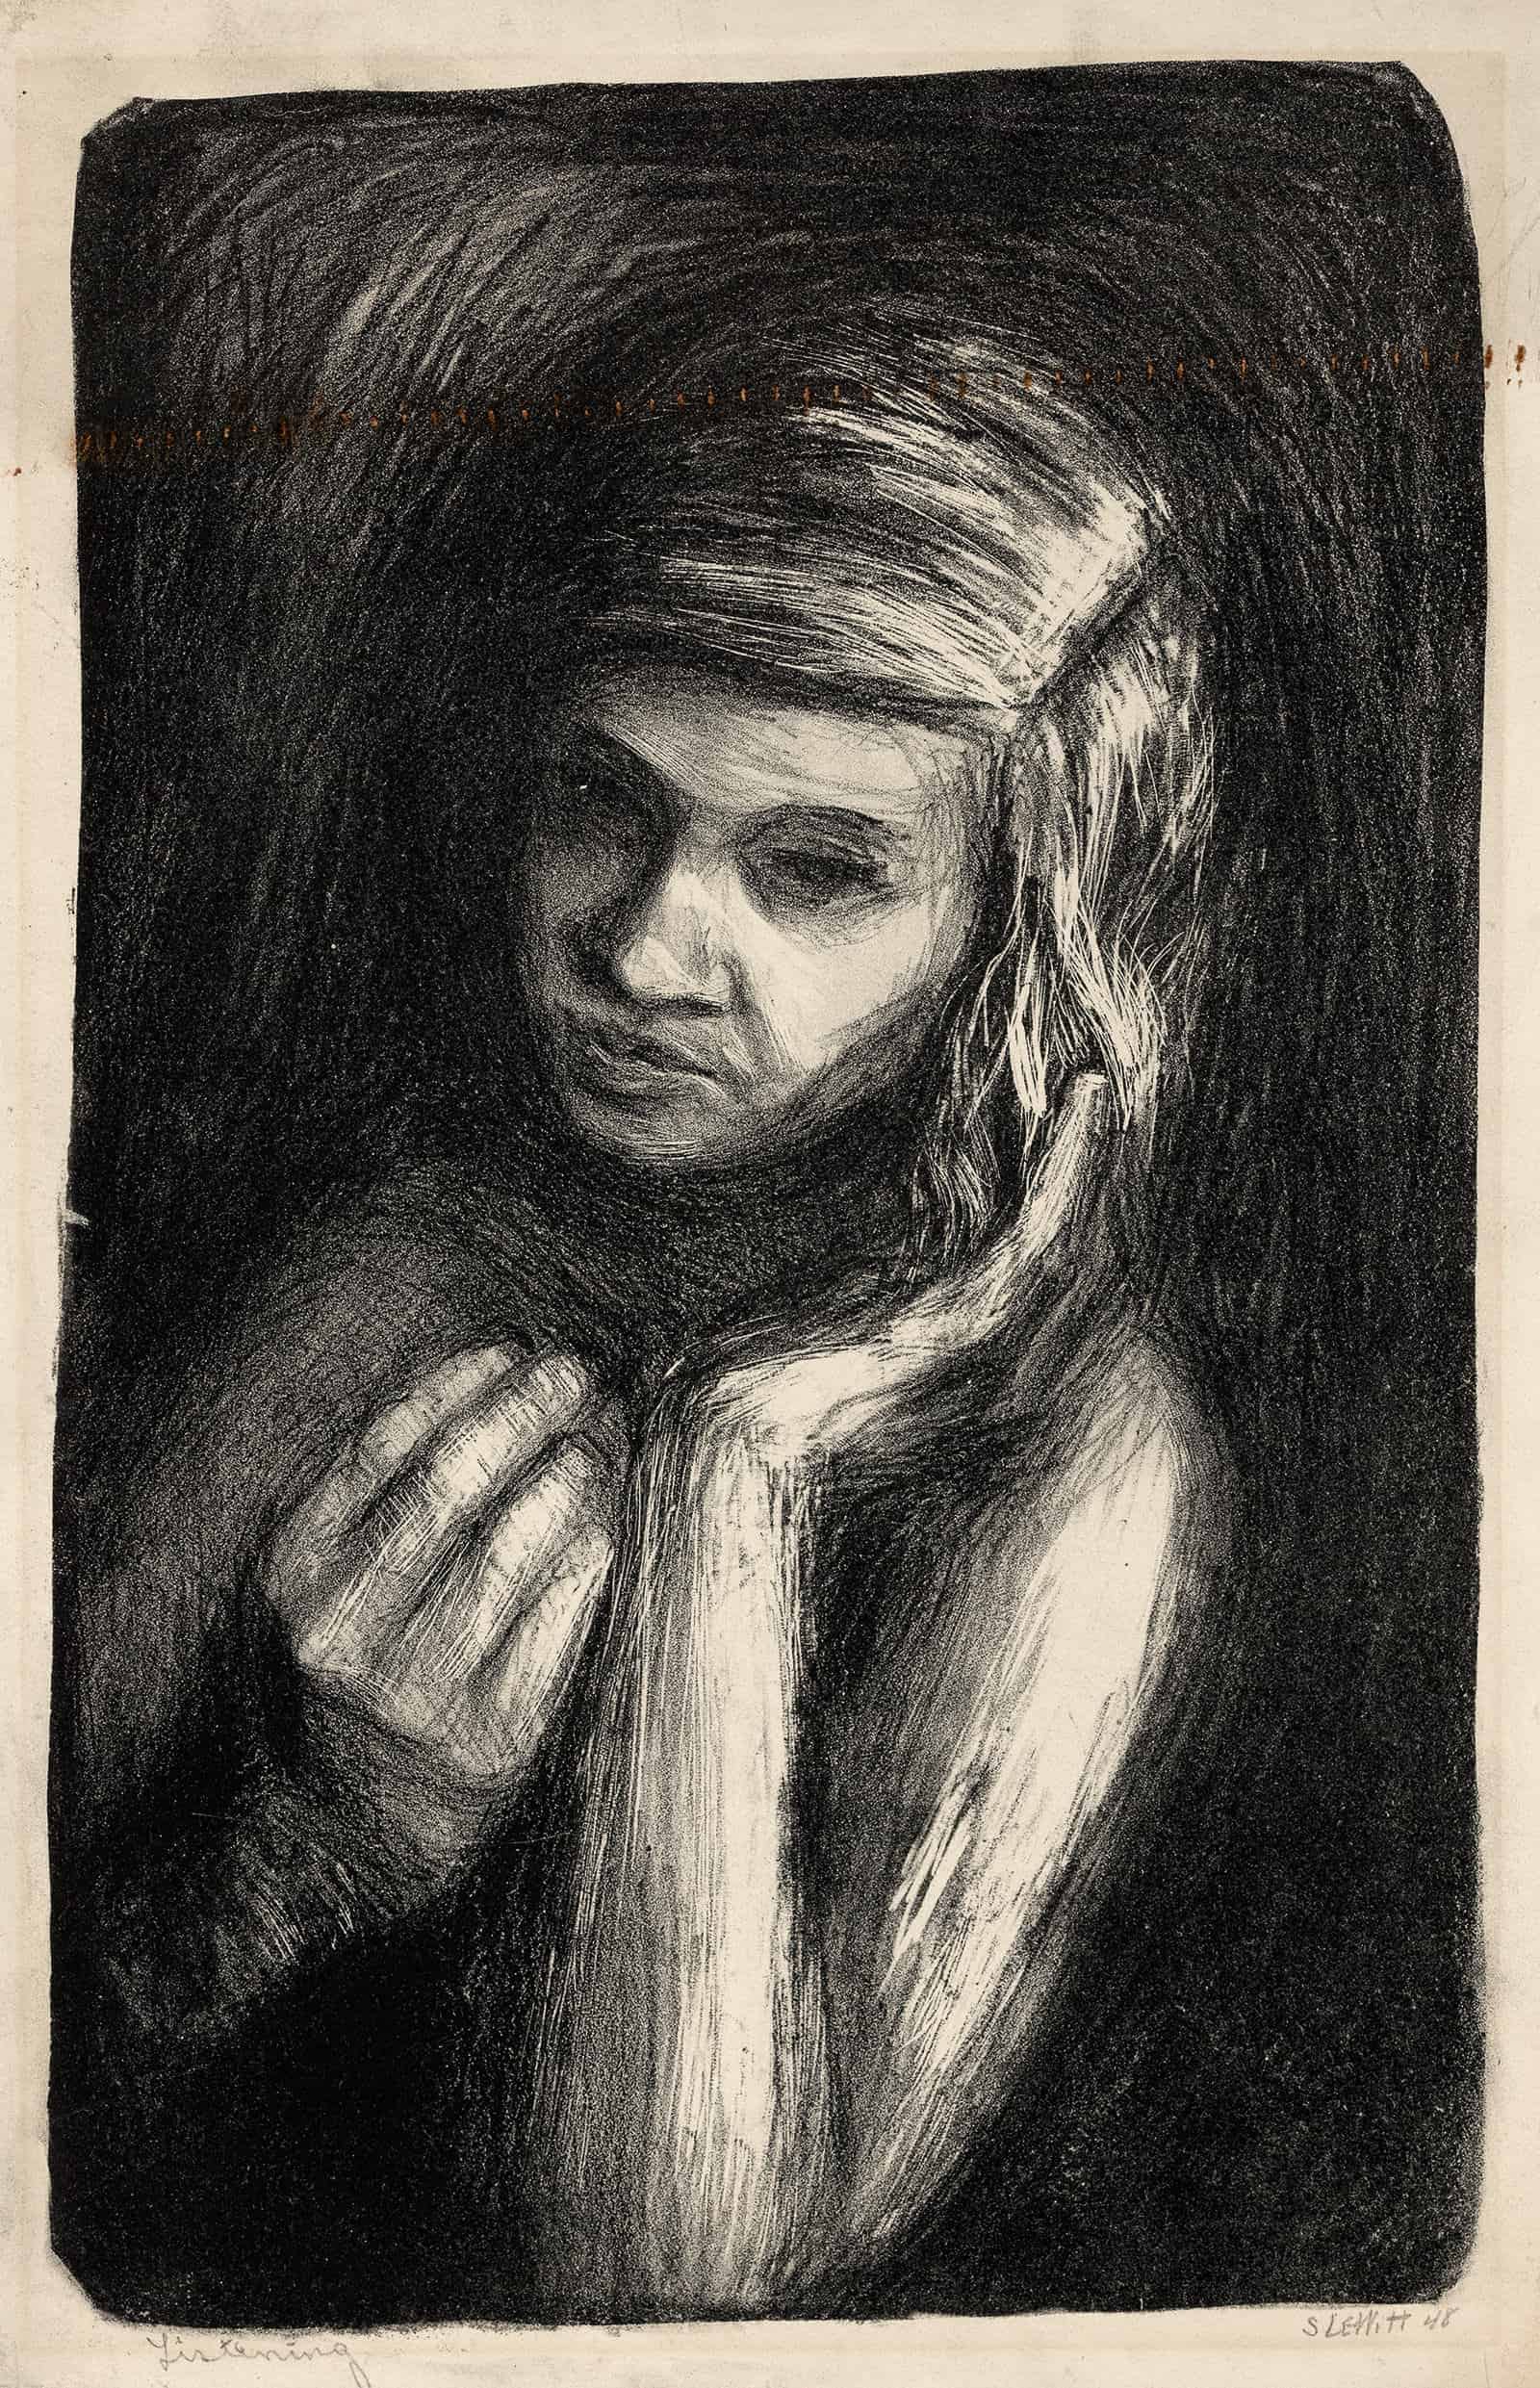 Sol LeWitt's lithograph Listening, a woman with her hand cupped to her ear, appears in Strict Beauty at the Williams College Museum of Art. Press image courtesy of WCMA.